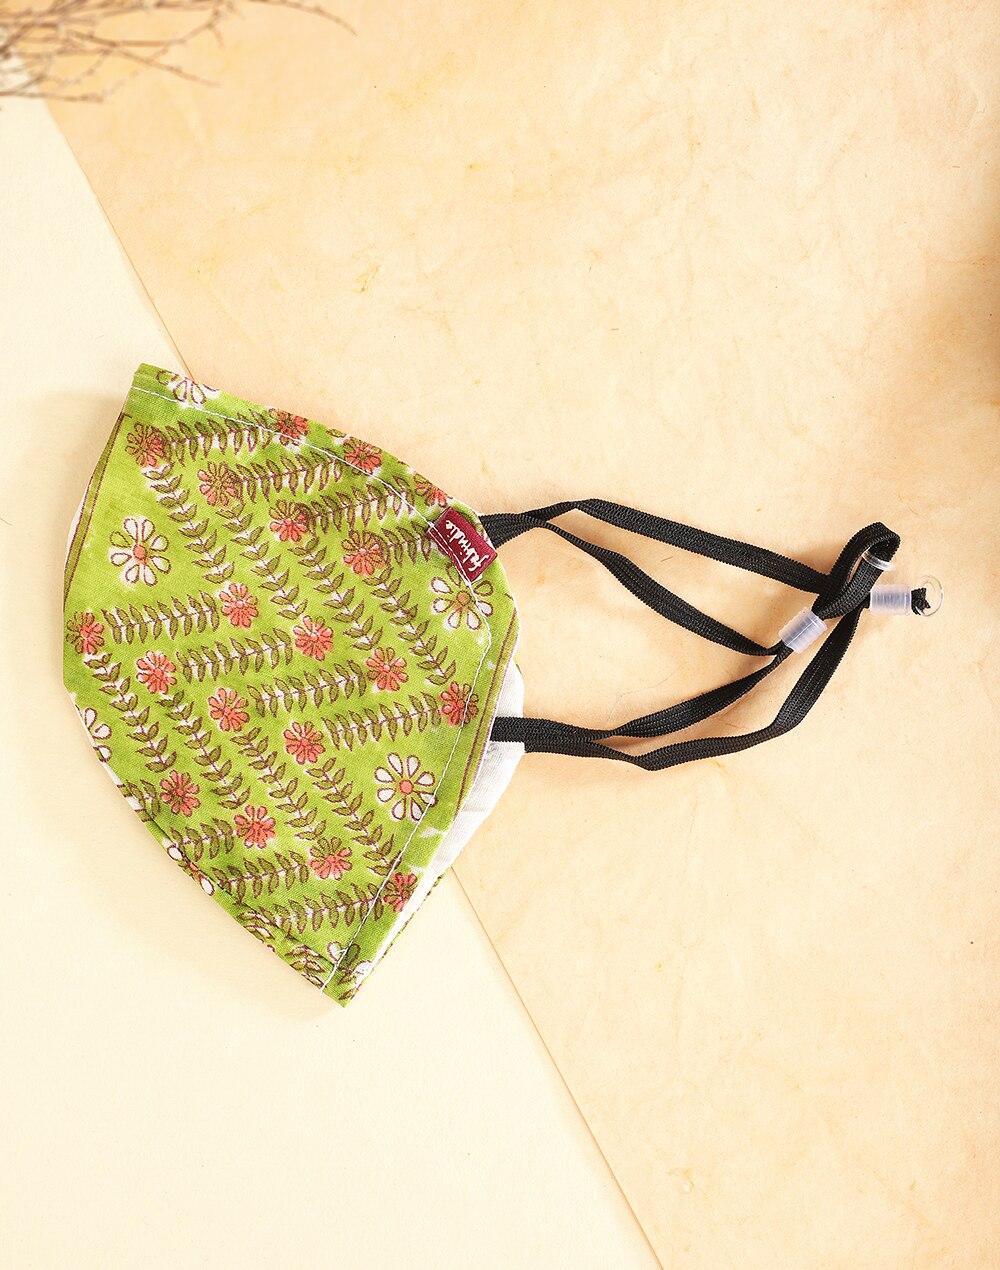 Fabric Printed Non Surgical Mask